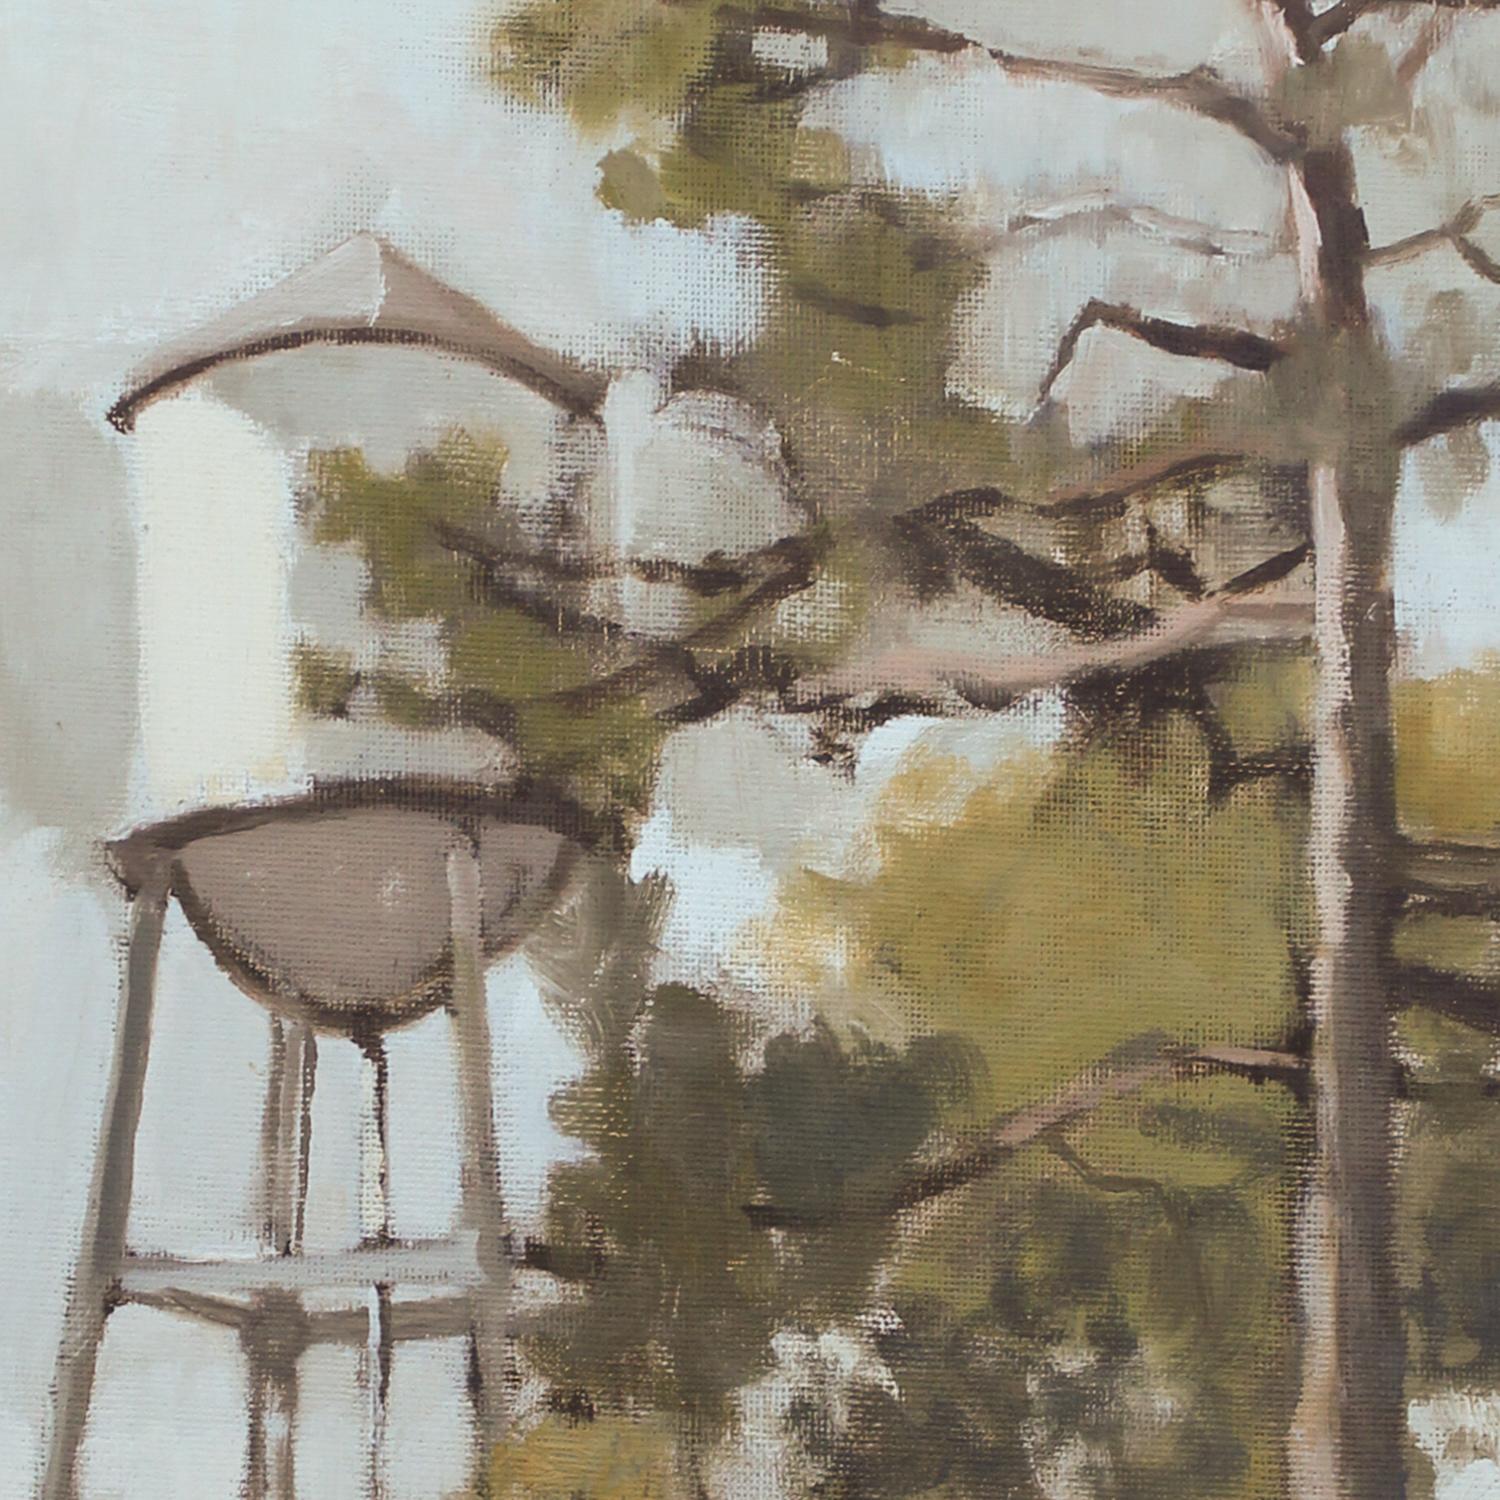 'Inglewood 7-10-2020' - plein air landscape - architectural painting  - Painting by Kathryn Keller